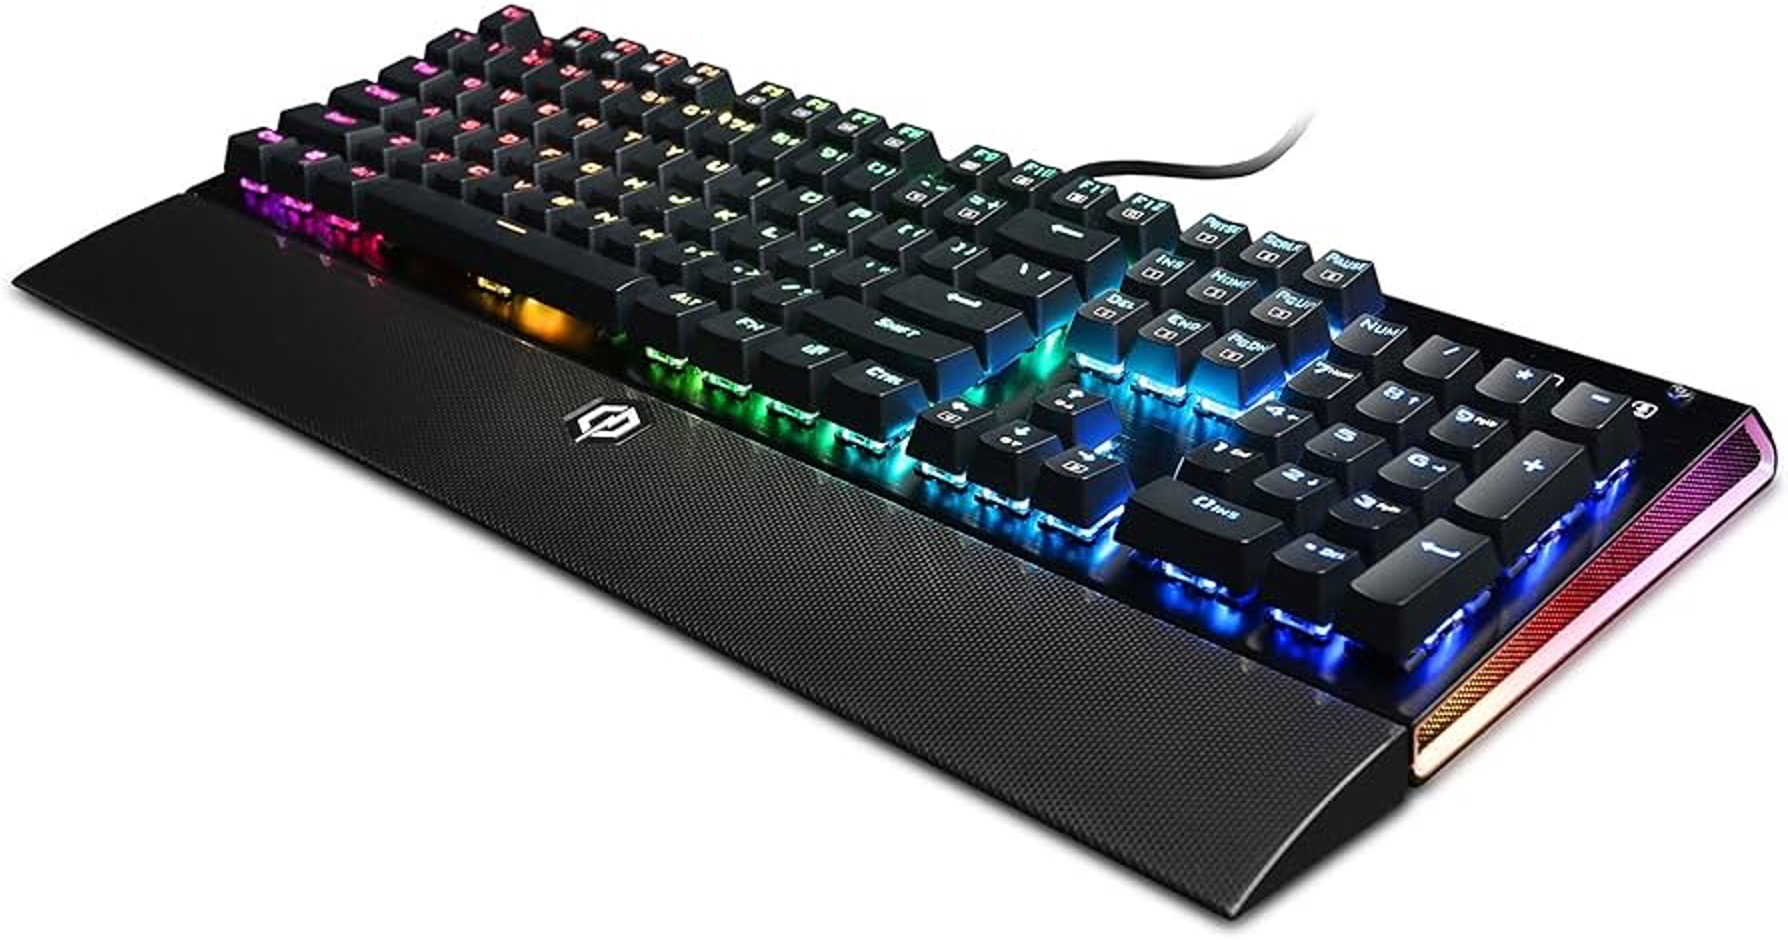 How To Program The Cyberpower Gaming Keyboard